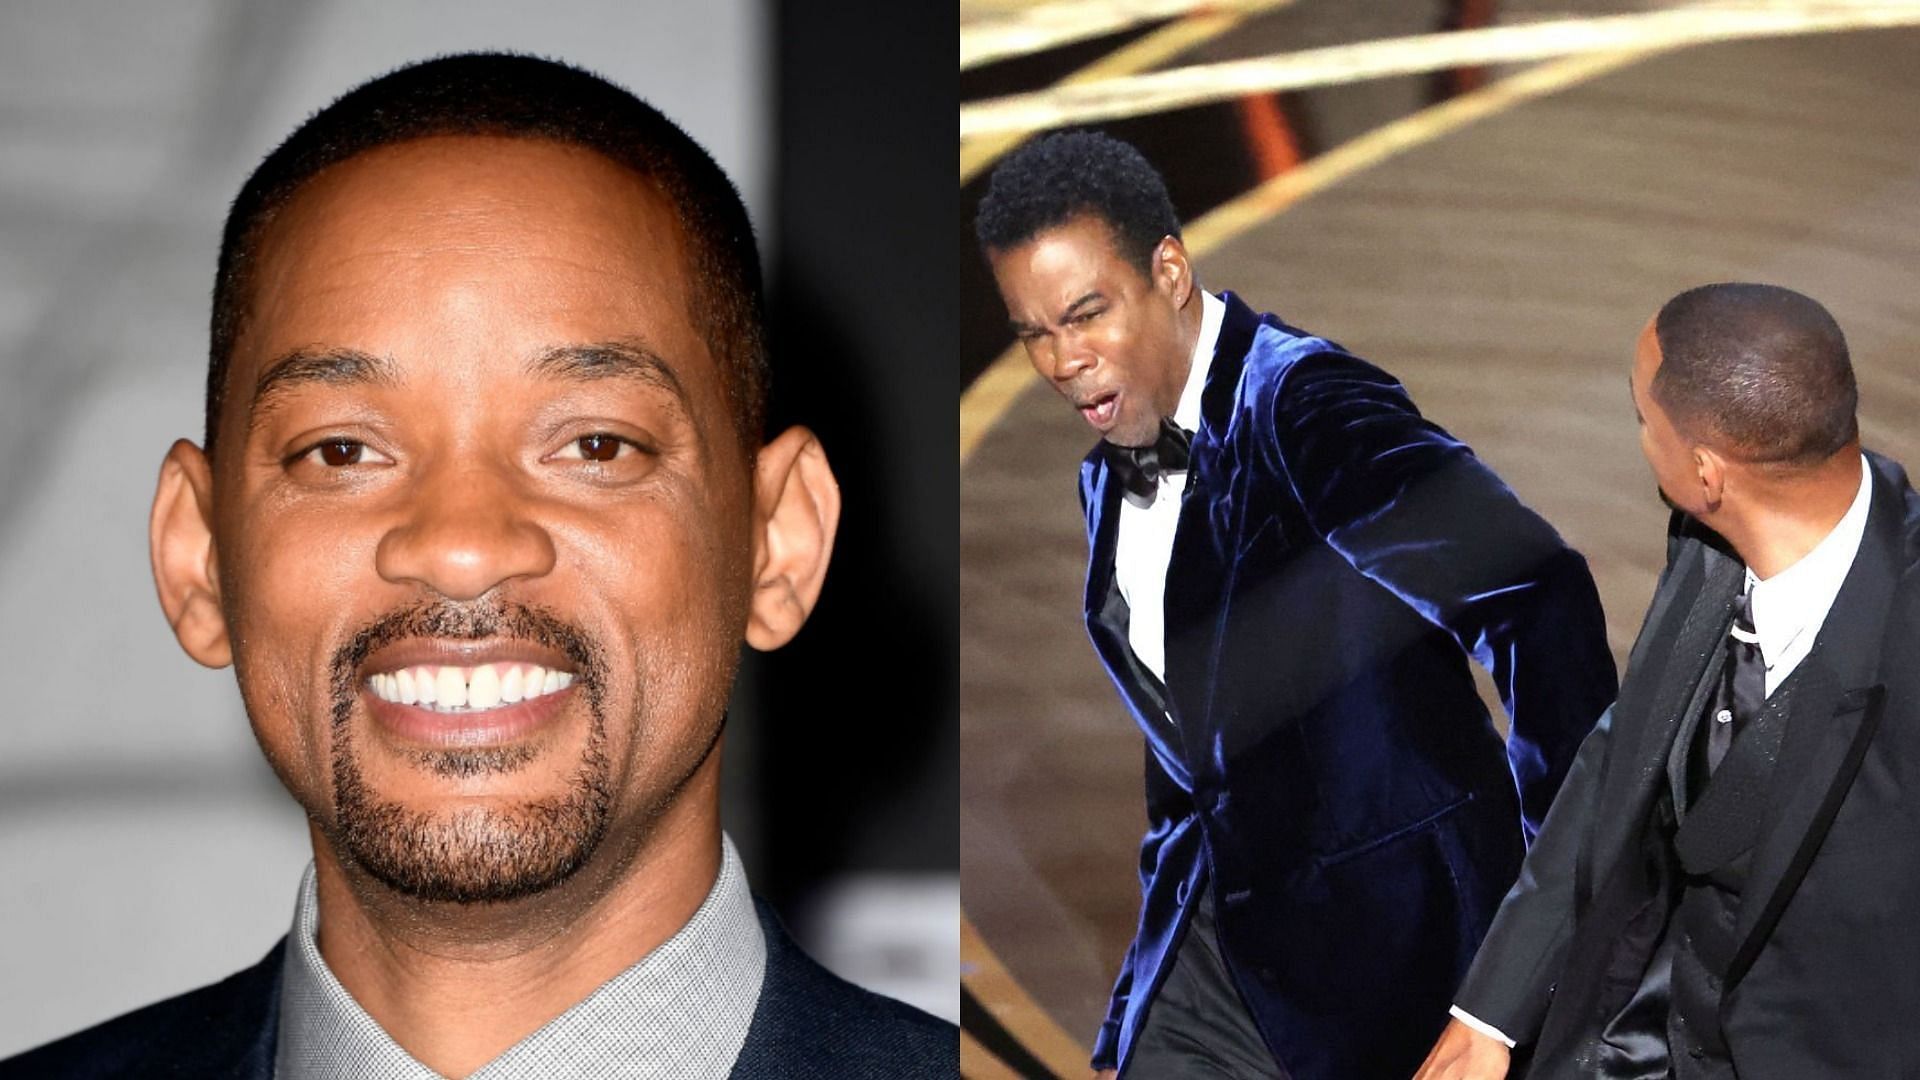 The Academy claimed that Will Smith refused to leave the Oscars ceremony after slapping Chris Rock (Image via Getty Images/Frazer Harrison and Myung Chun)